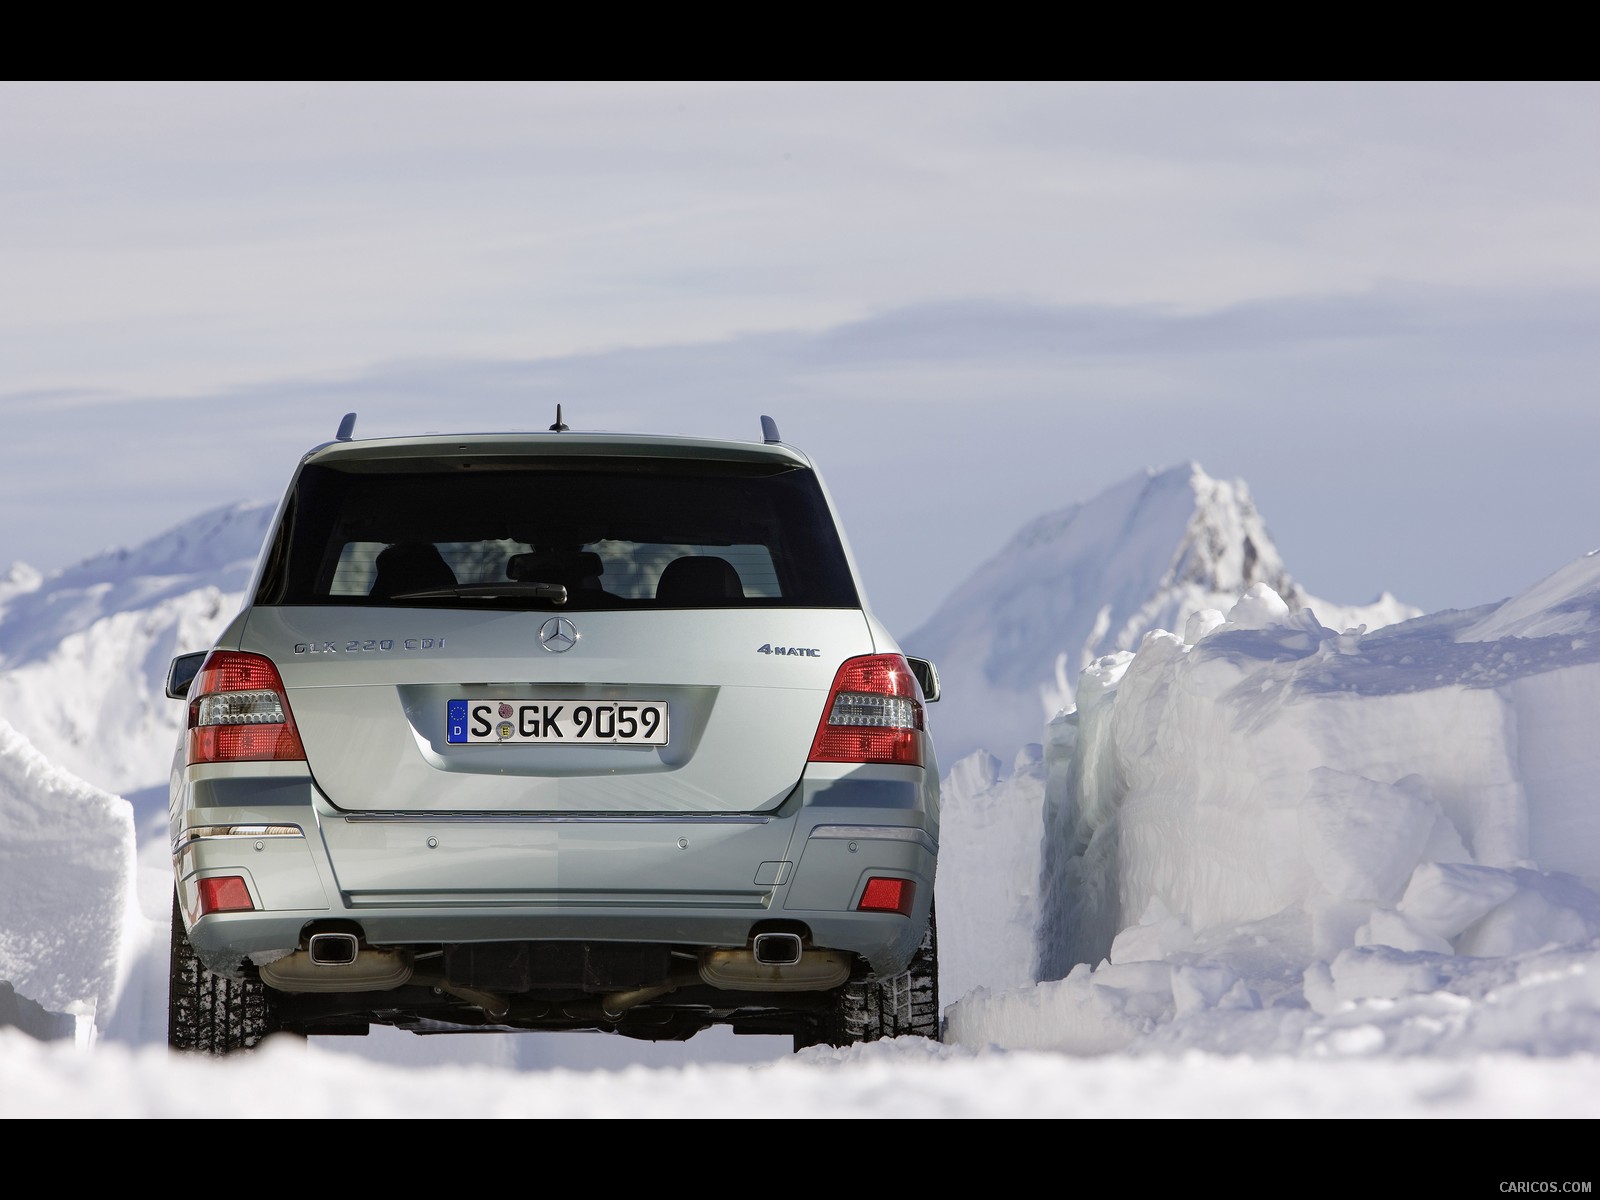 Mercedes-Benz GLK-Class - On Snow - Rear Angle , #40 of 351